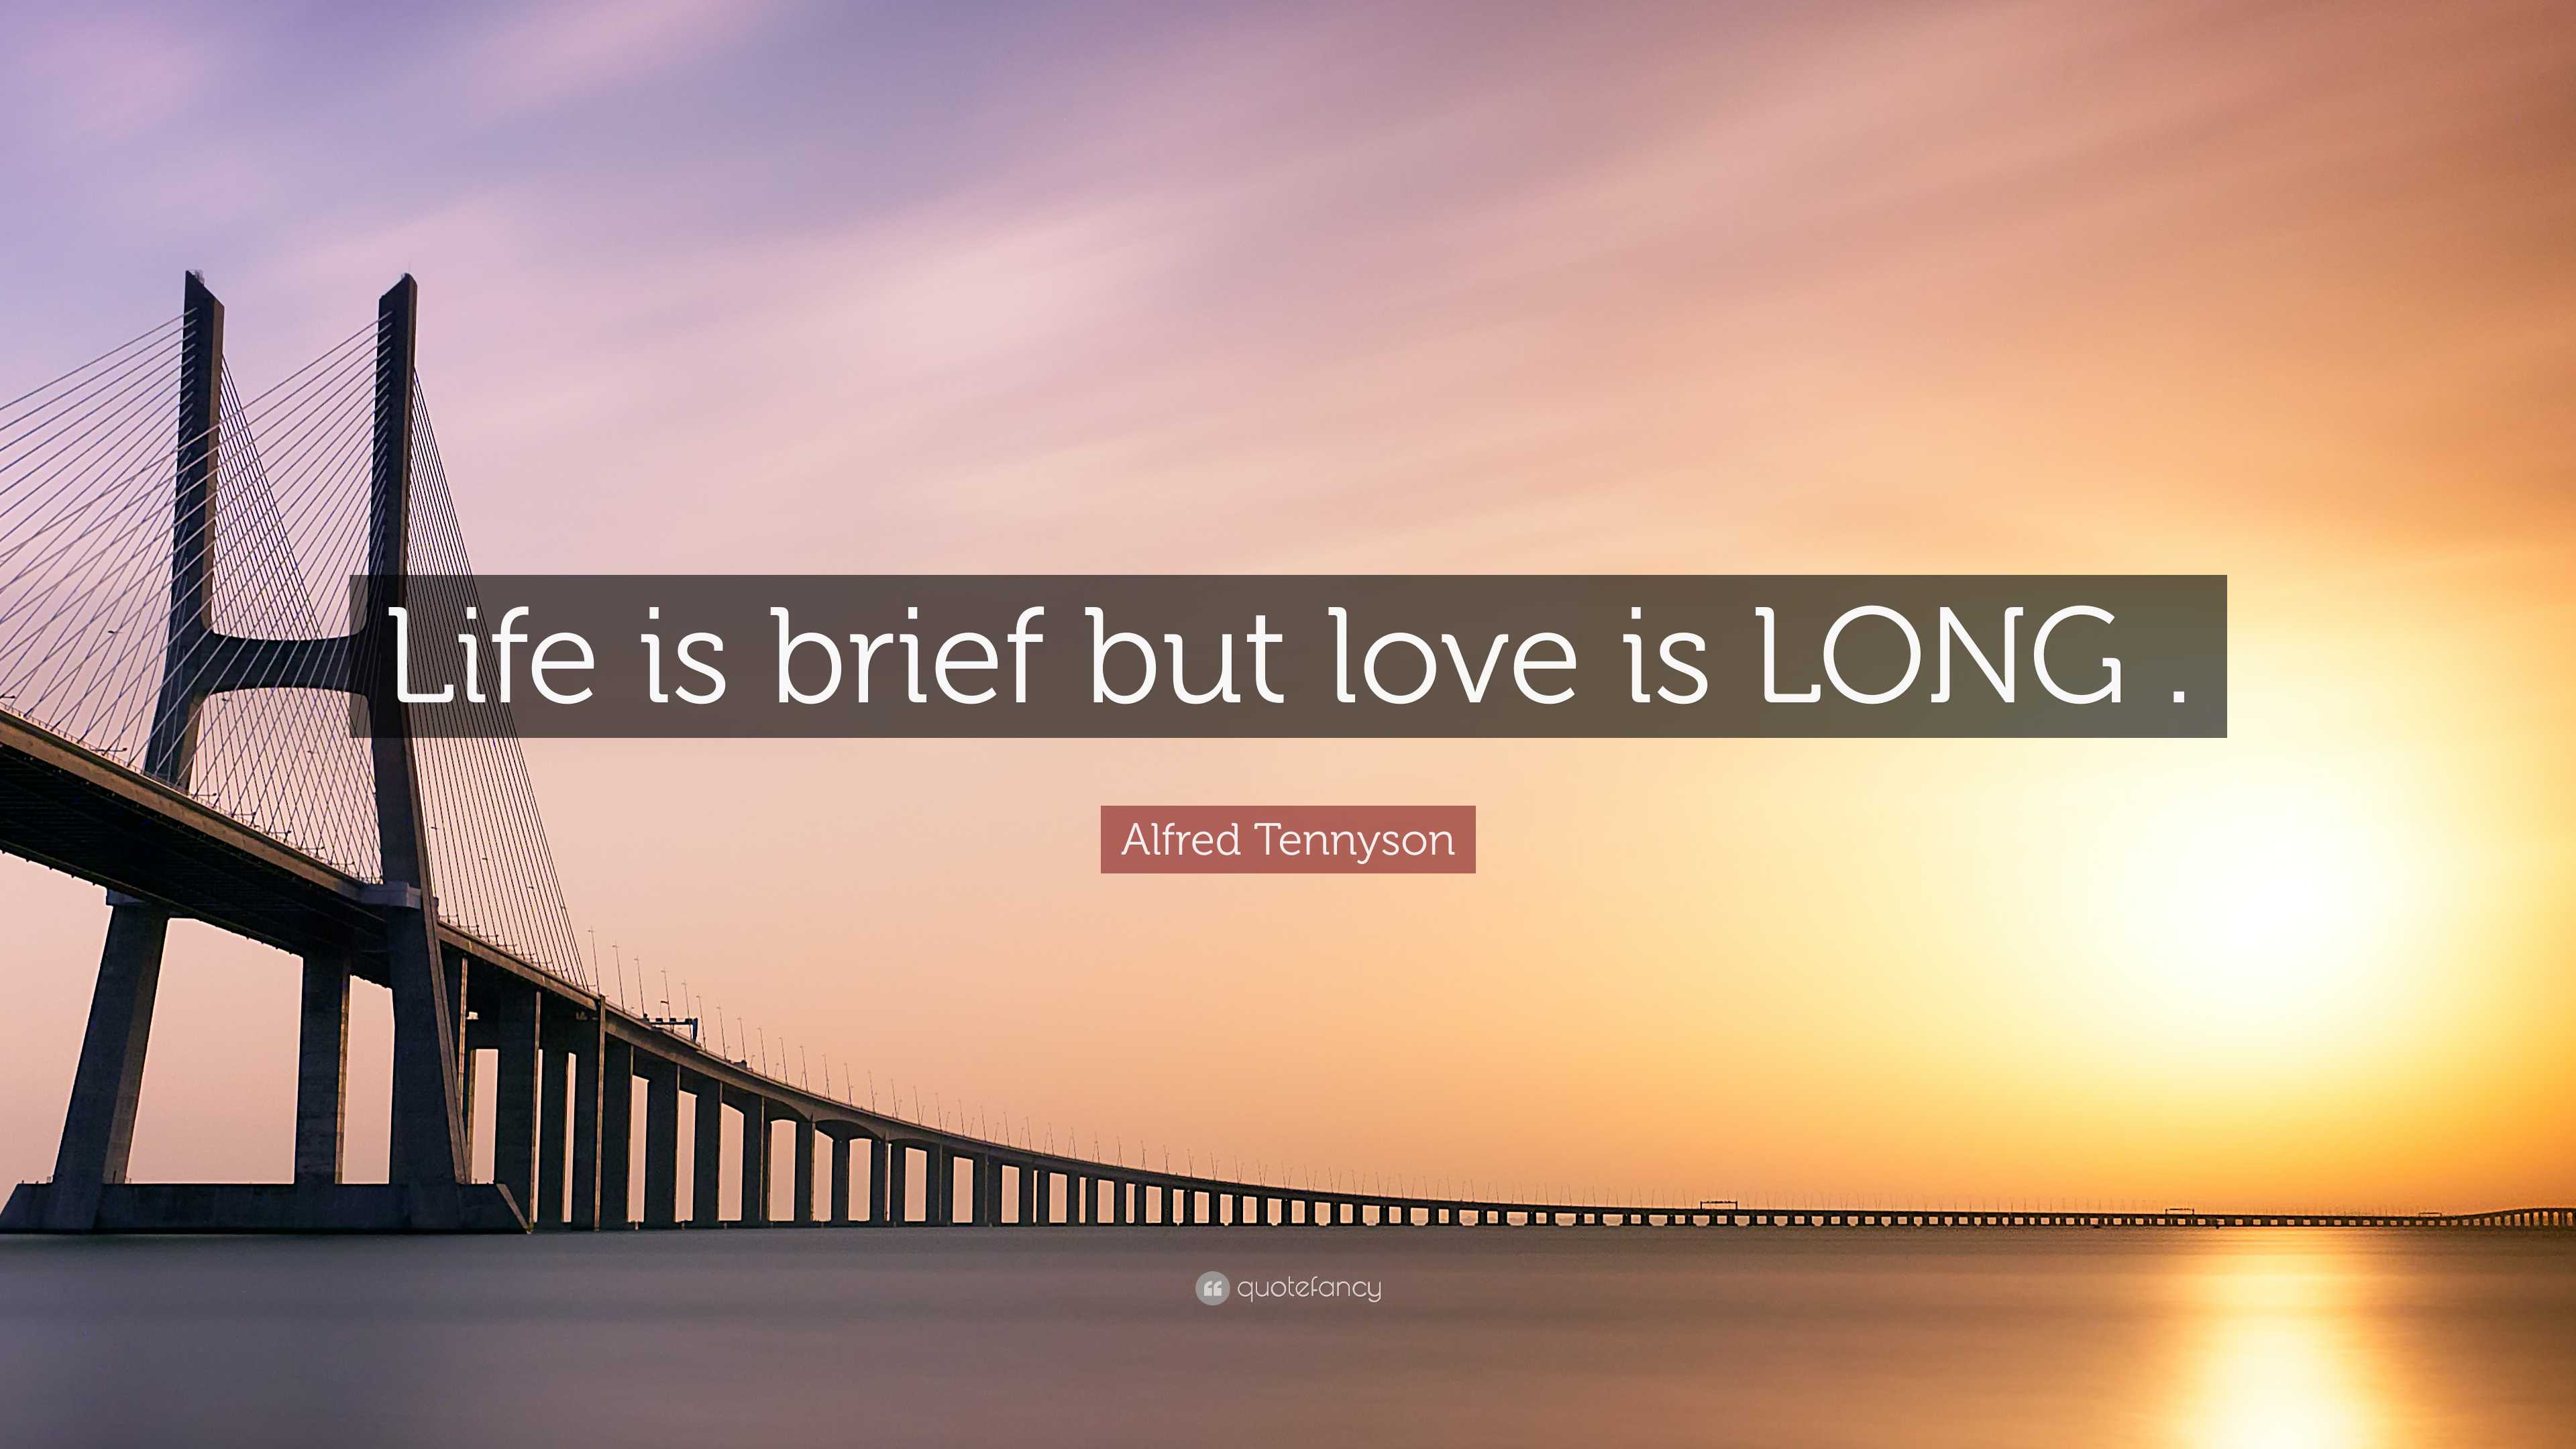 https://quotefancy.com/media/wallpaper/3840x2160/7949127-Alfred-Tennyson-Quote-Life-is-brief-but-love-is-LONG.jpg